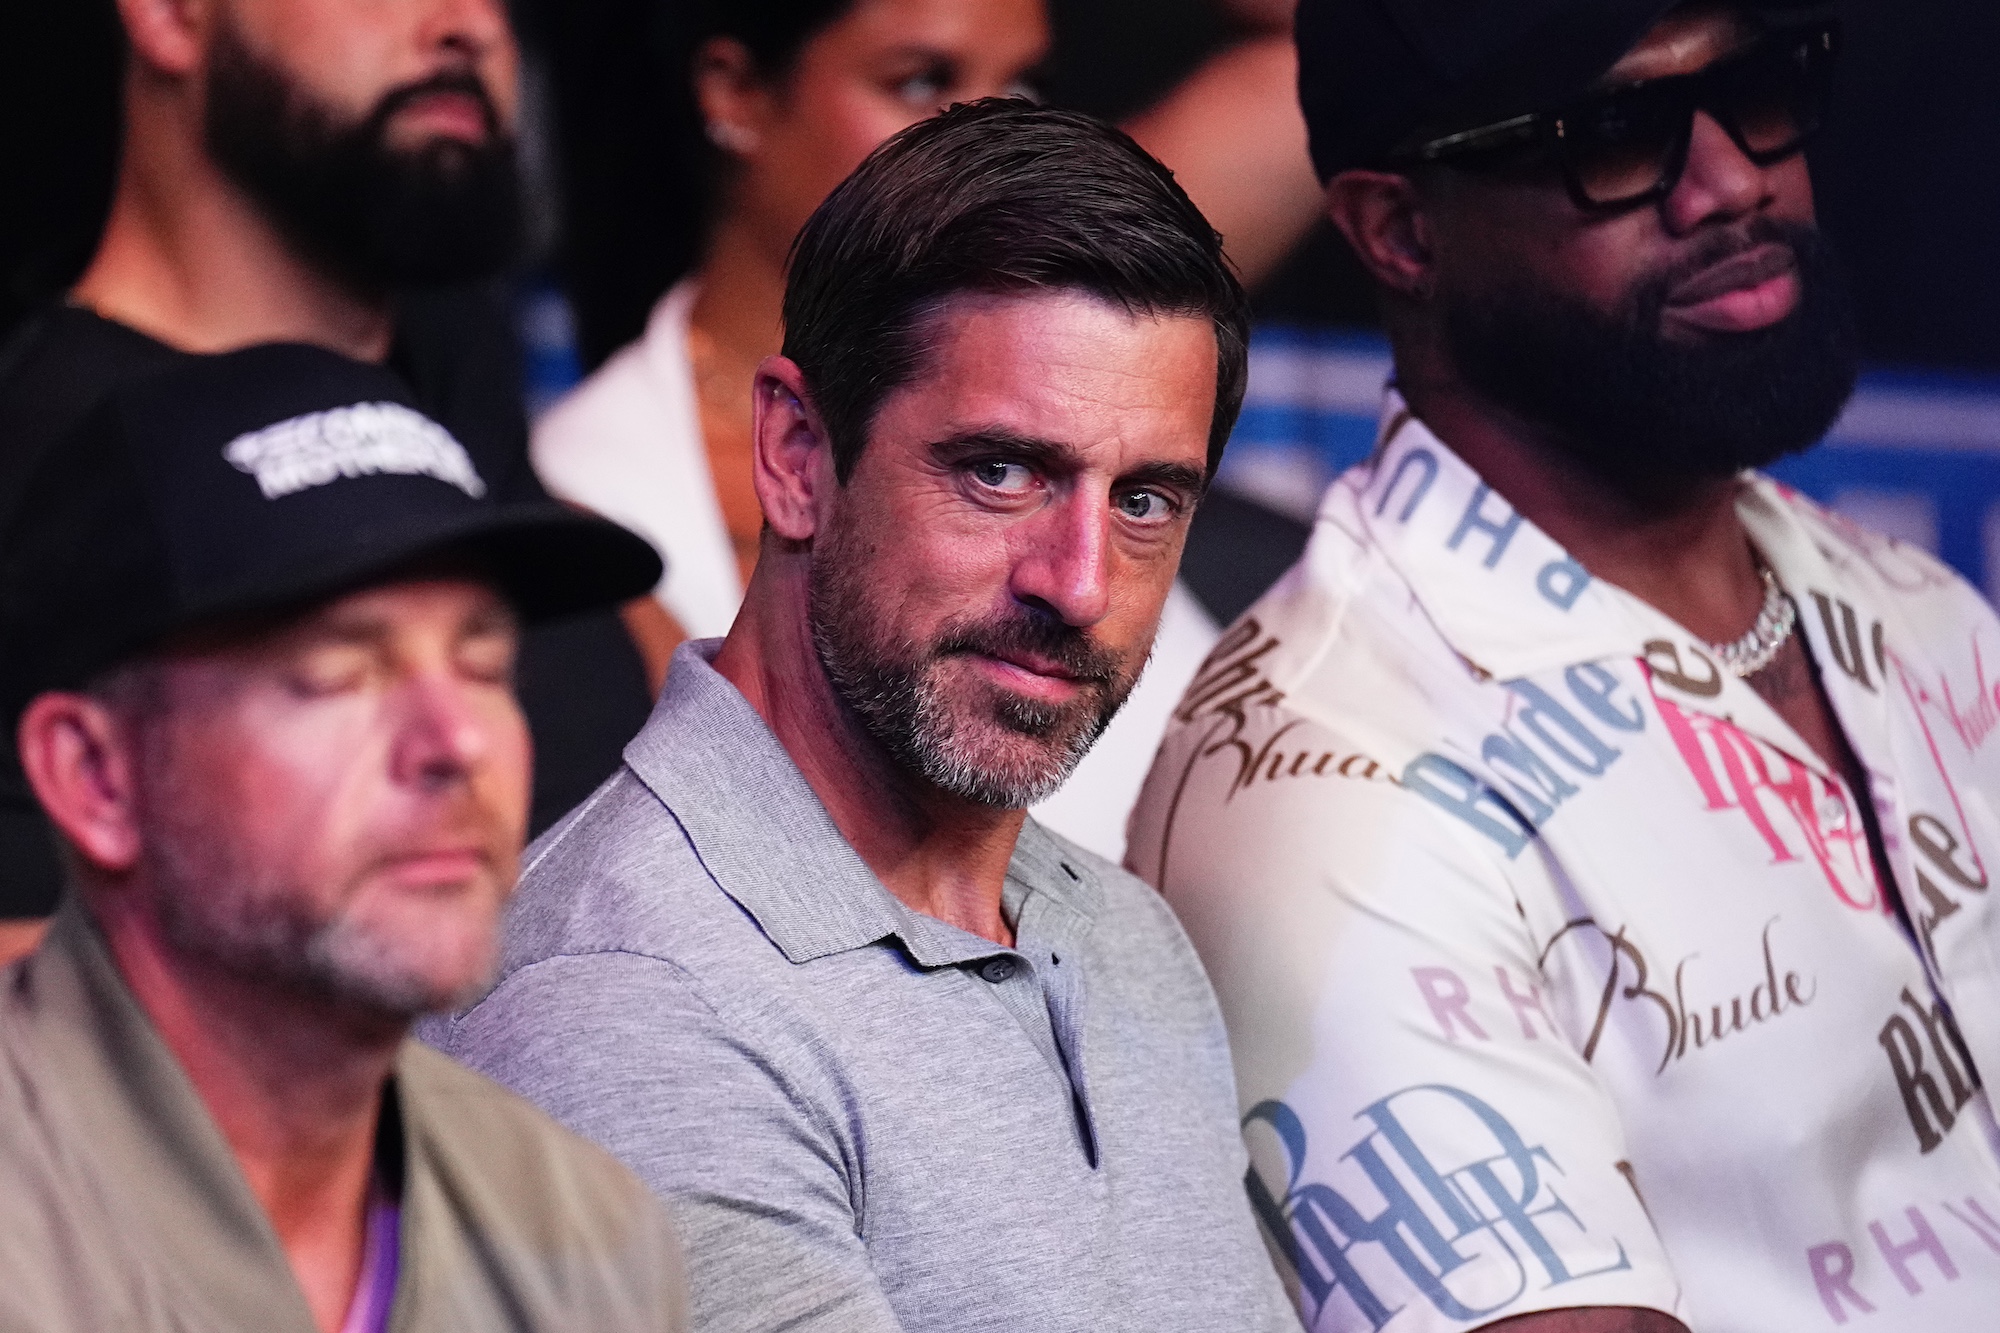 LAS VEGAS, NEVADA - JUNE 29: New York Jets quarterback Aaron Rodgers looks on during the UFC 303 event at T-Mobile Arena on June 29, 2024 in Las Vegas, Nevada. (Photo by Chris Unger/Zuffa LLC via Getty Images)